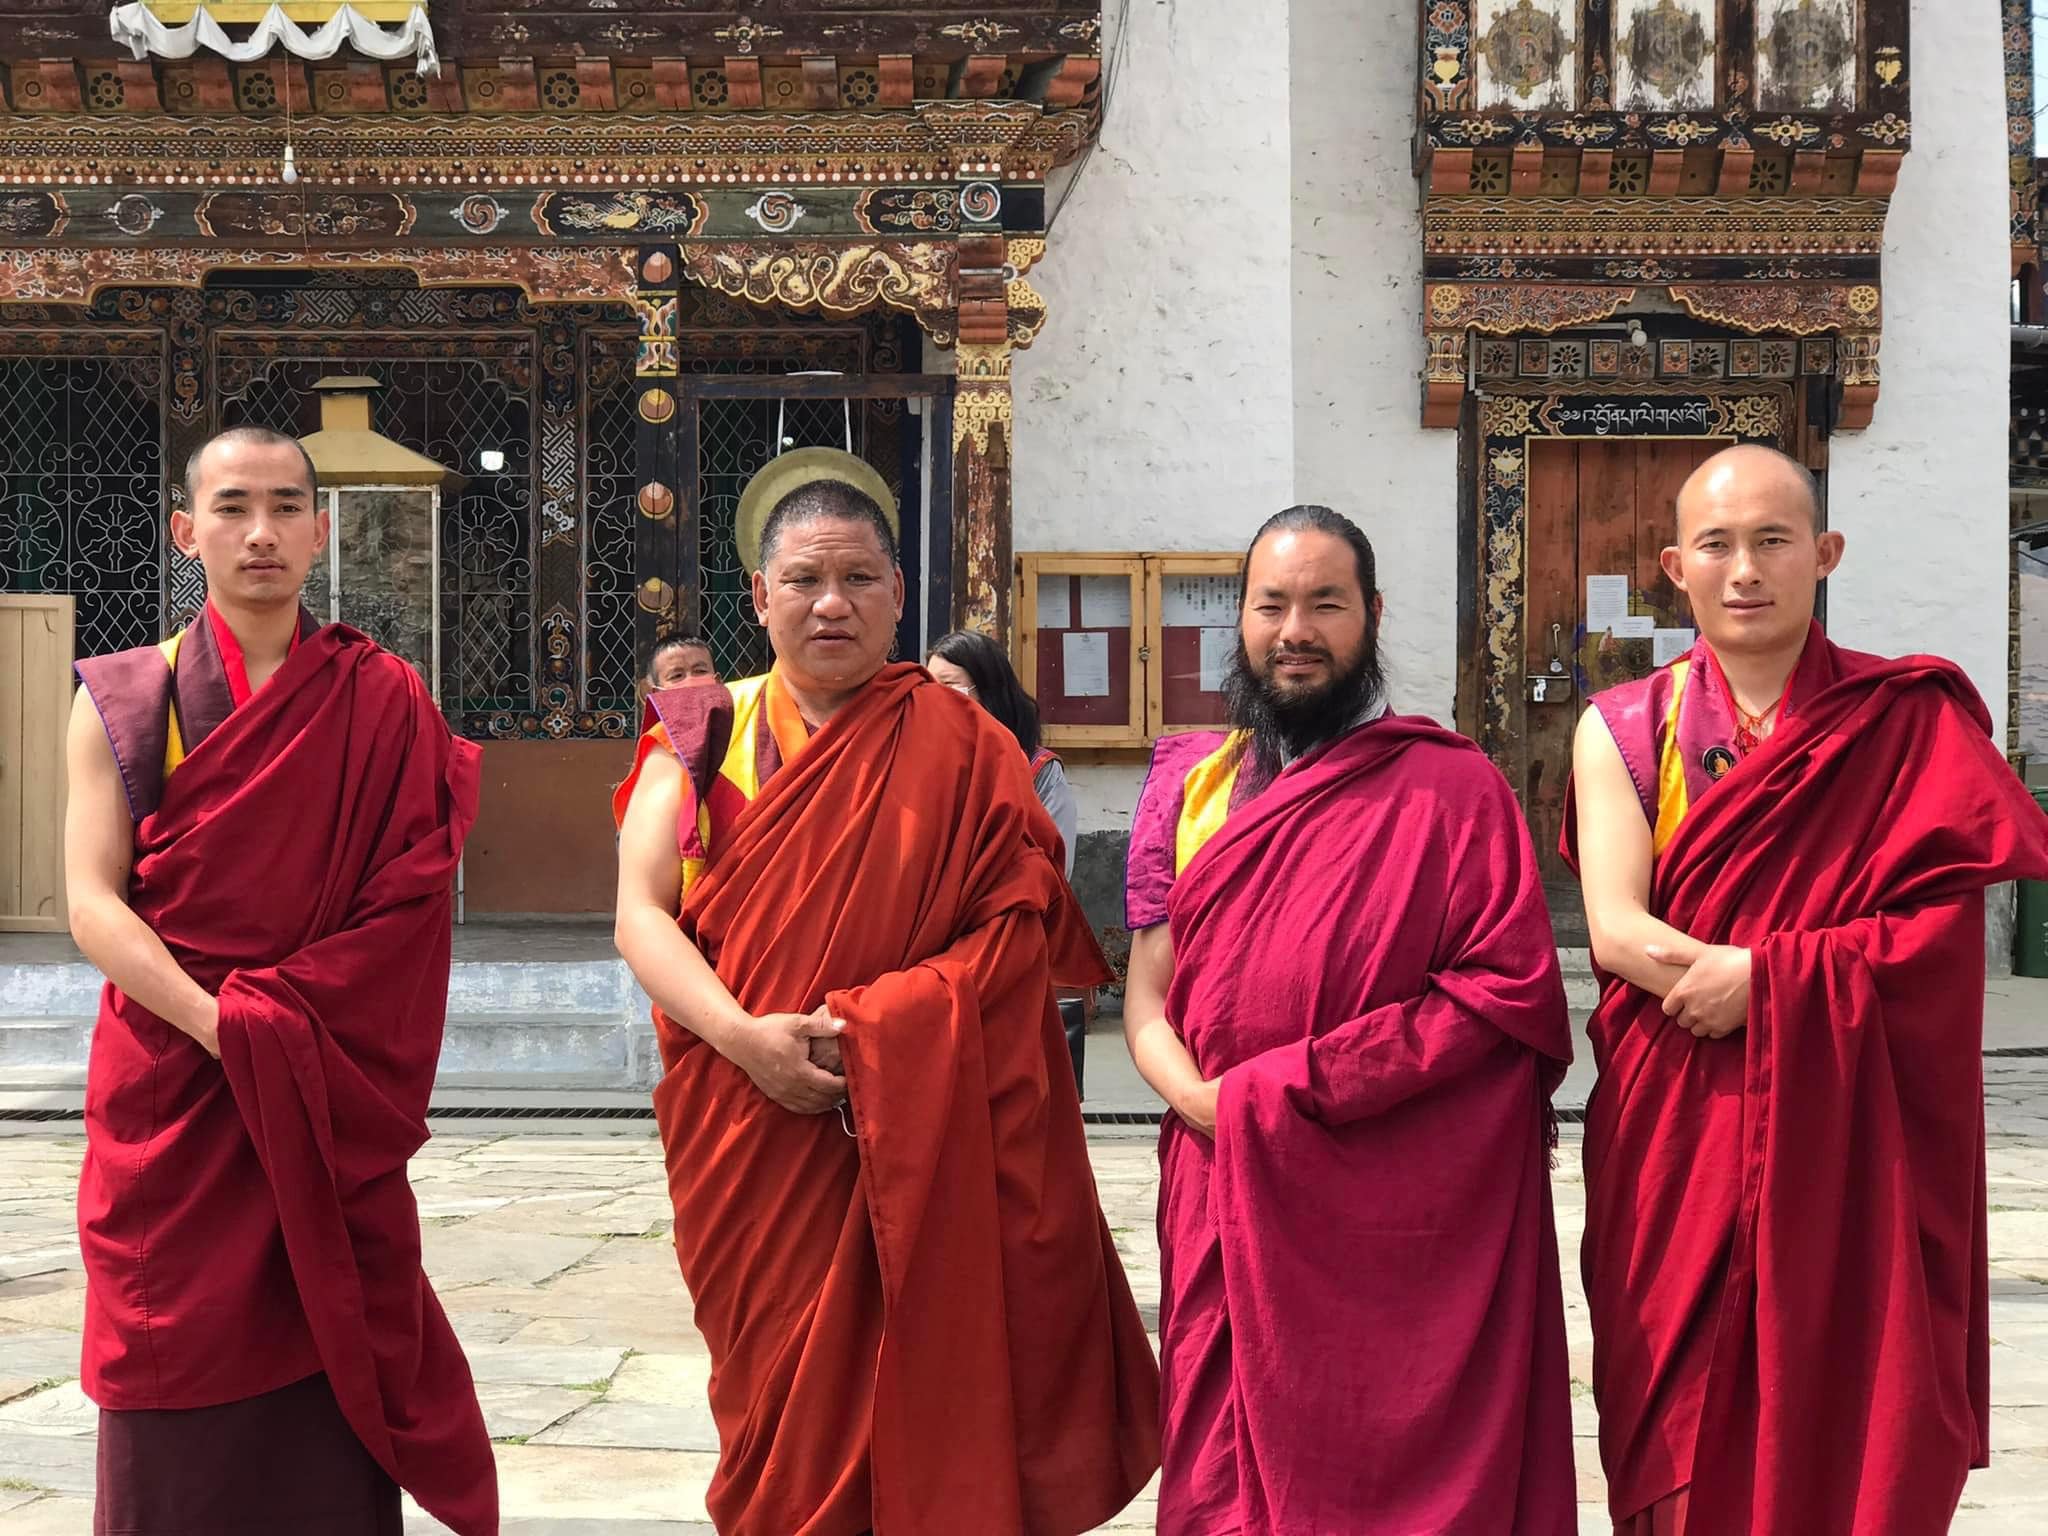 Newly appointed lopens received Tashi Khadar from the Khenpo of Busa wangdue Goenpa Buddhist college.